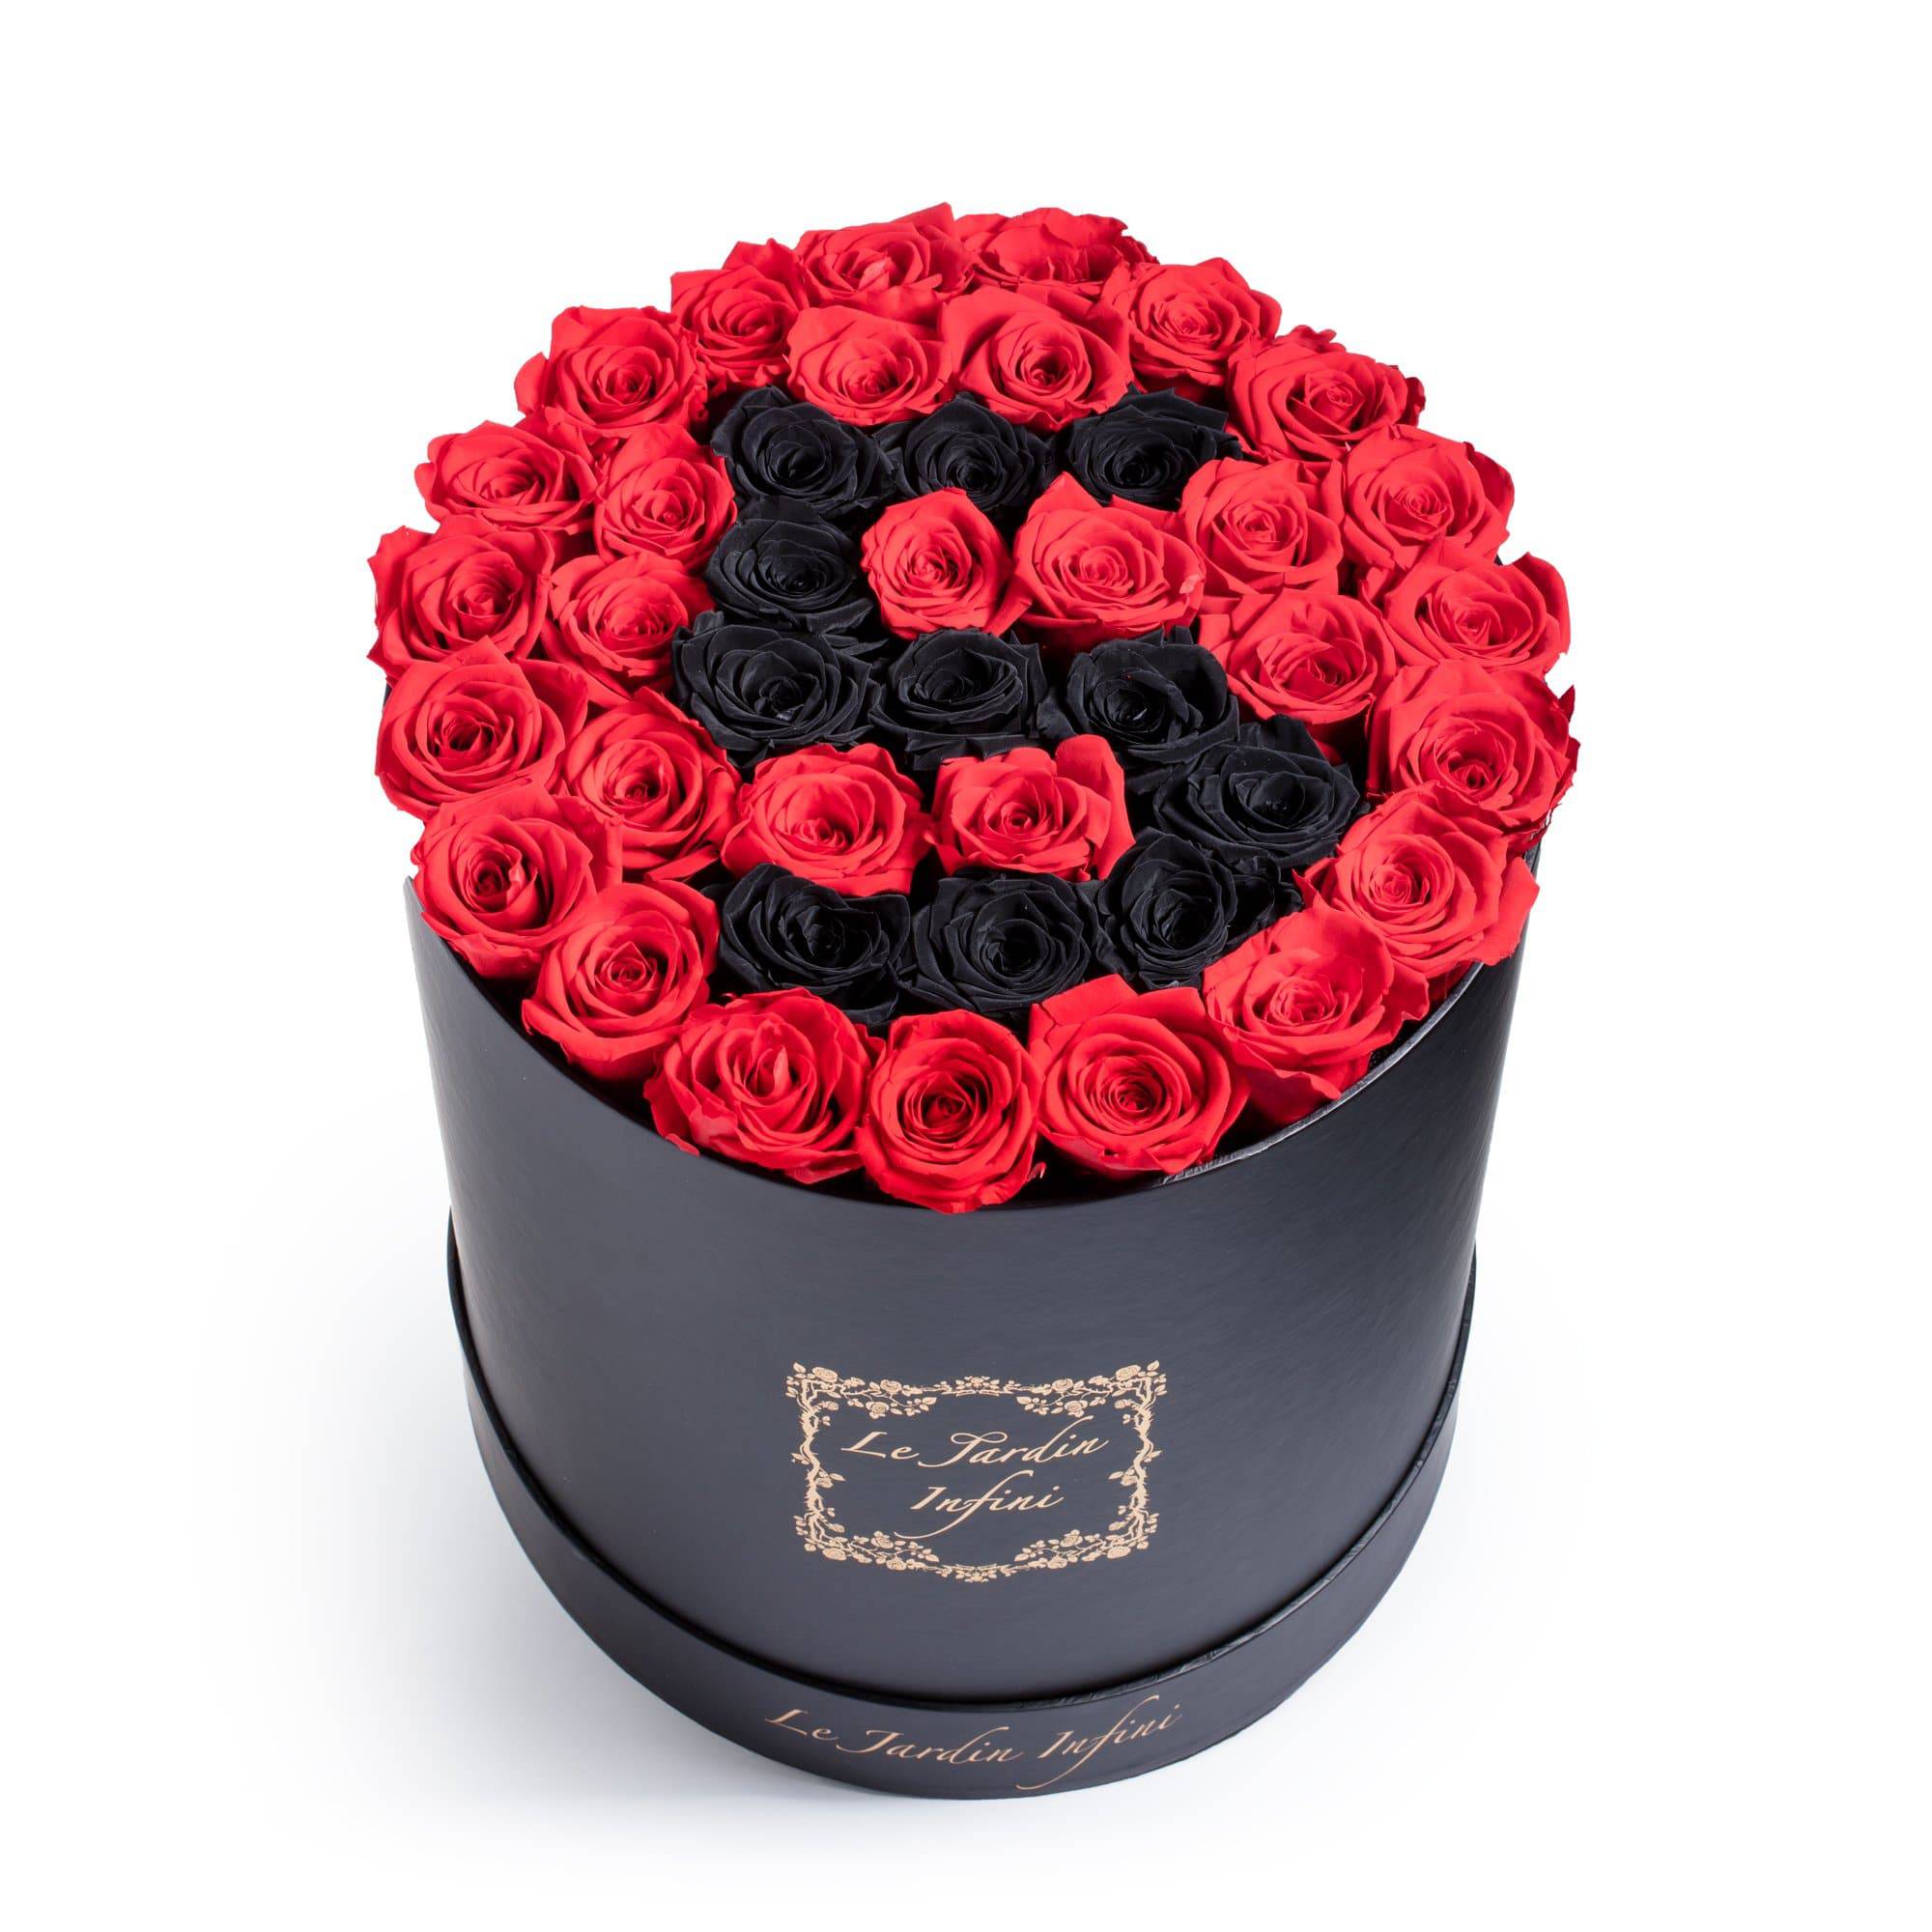 #5 Black & Red Preserved Roses - Large Round Black Box - Le Jardin Infini Roses in a Box